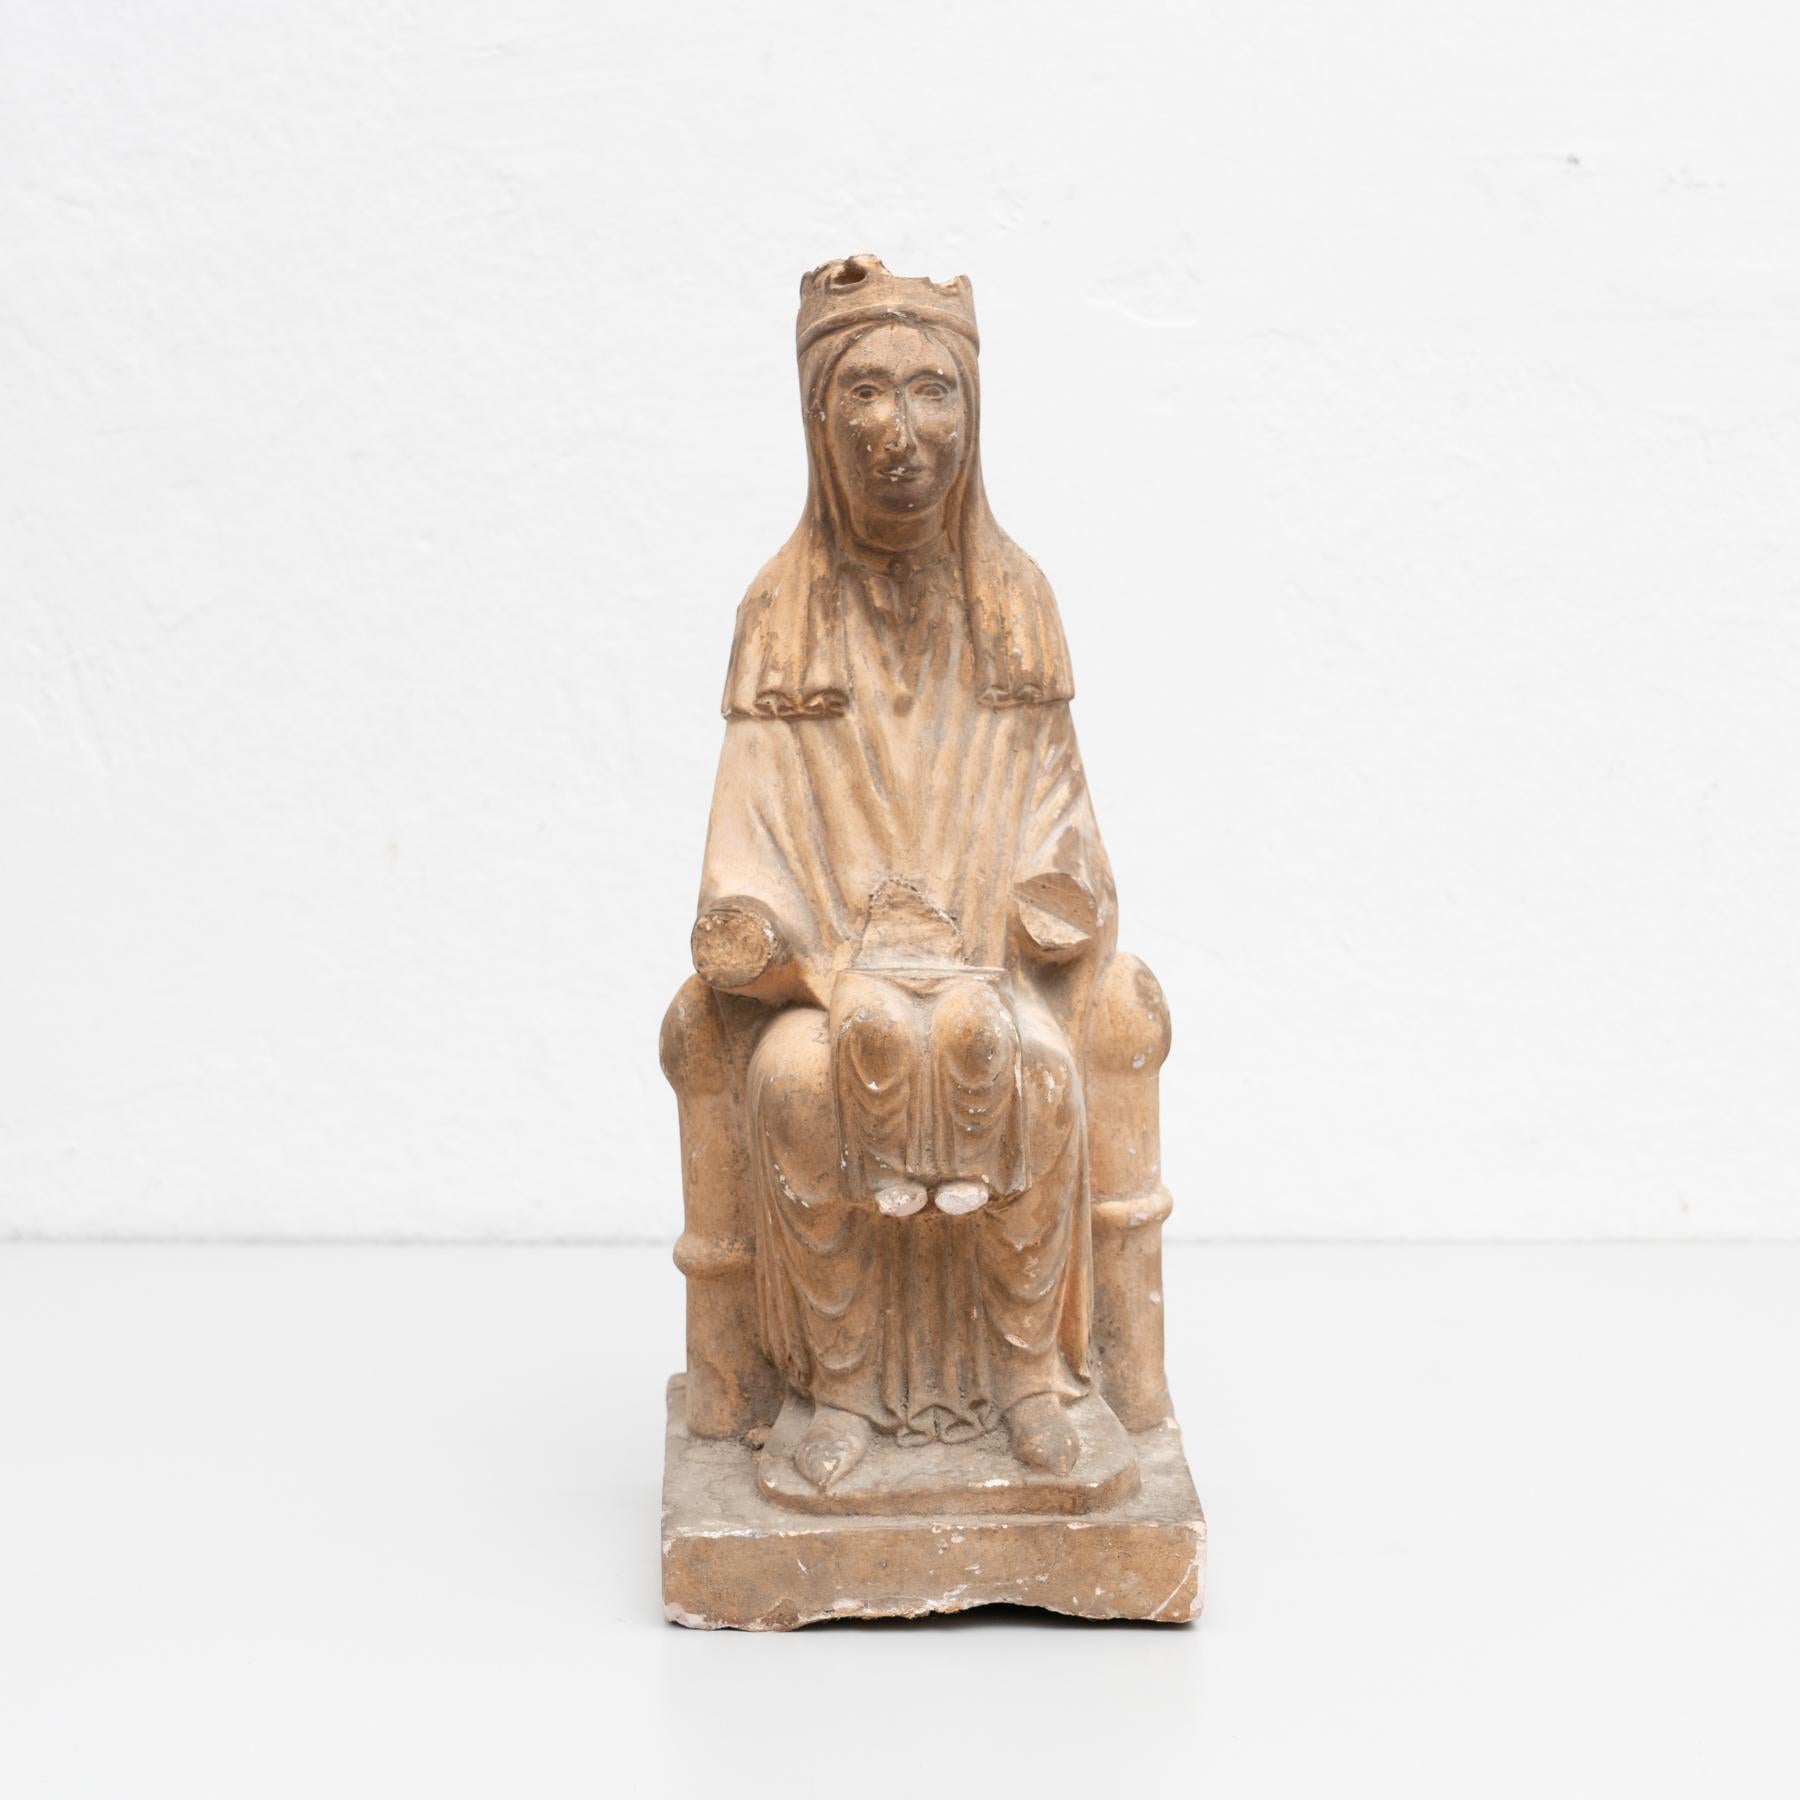 Traditional religious plaster figure of a virgin.

Made in traditional Catalan atelier in Olot, Spain, circa 1950.

In original condition, with minor wear consistent with age and use, preserving a beautiful patina.

Materials:
Plaster.
  